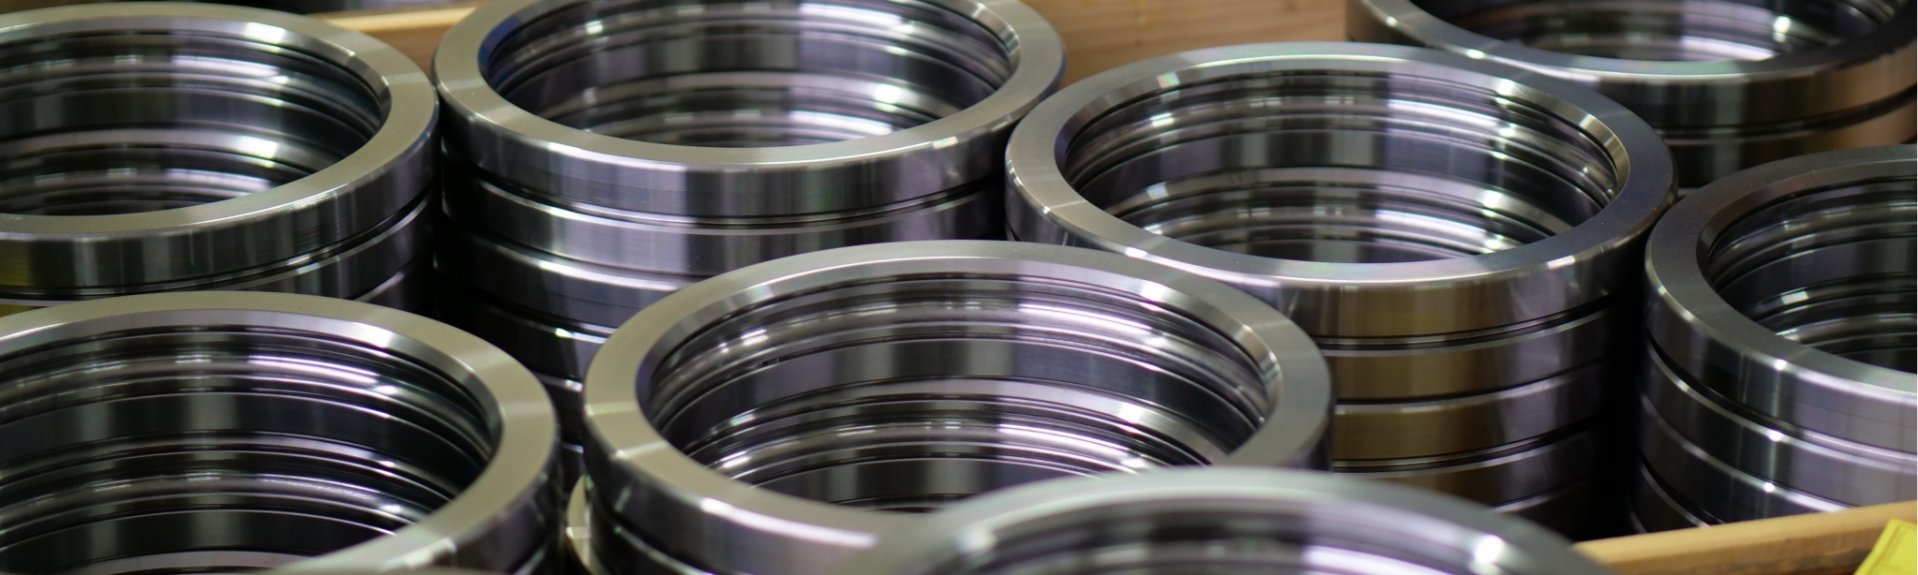 The outer bearing rings of Acros Nineteen hubs.